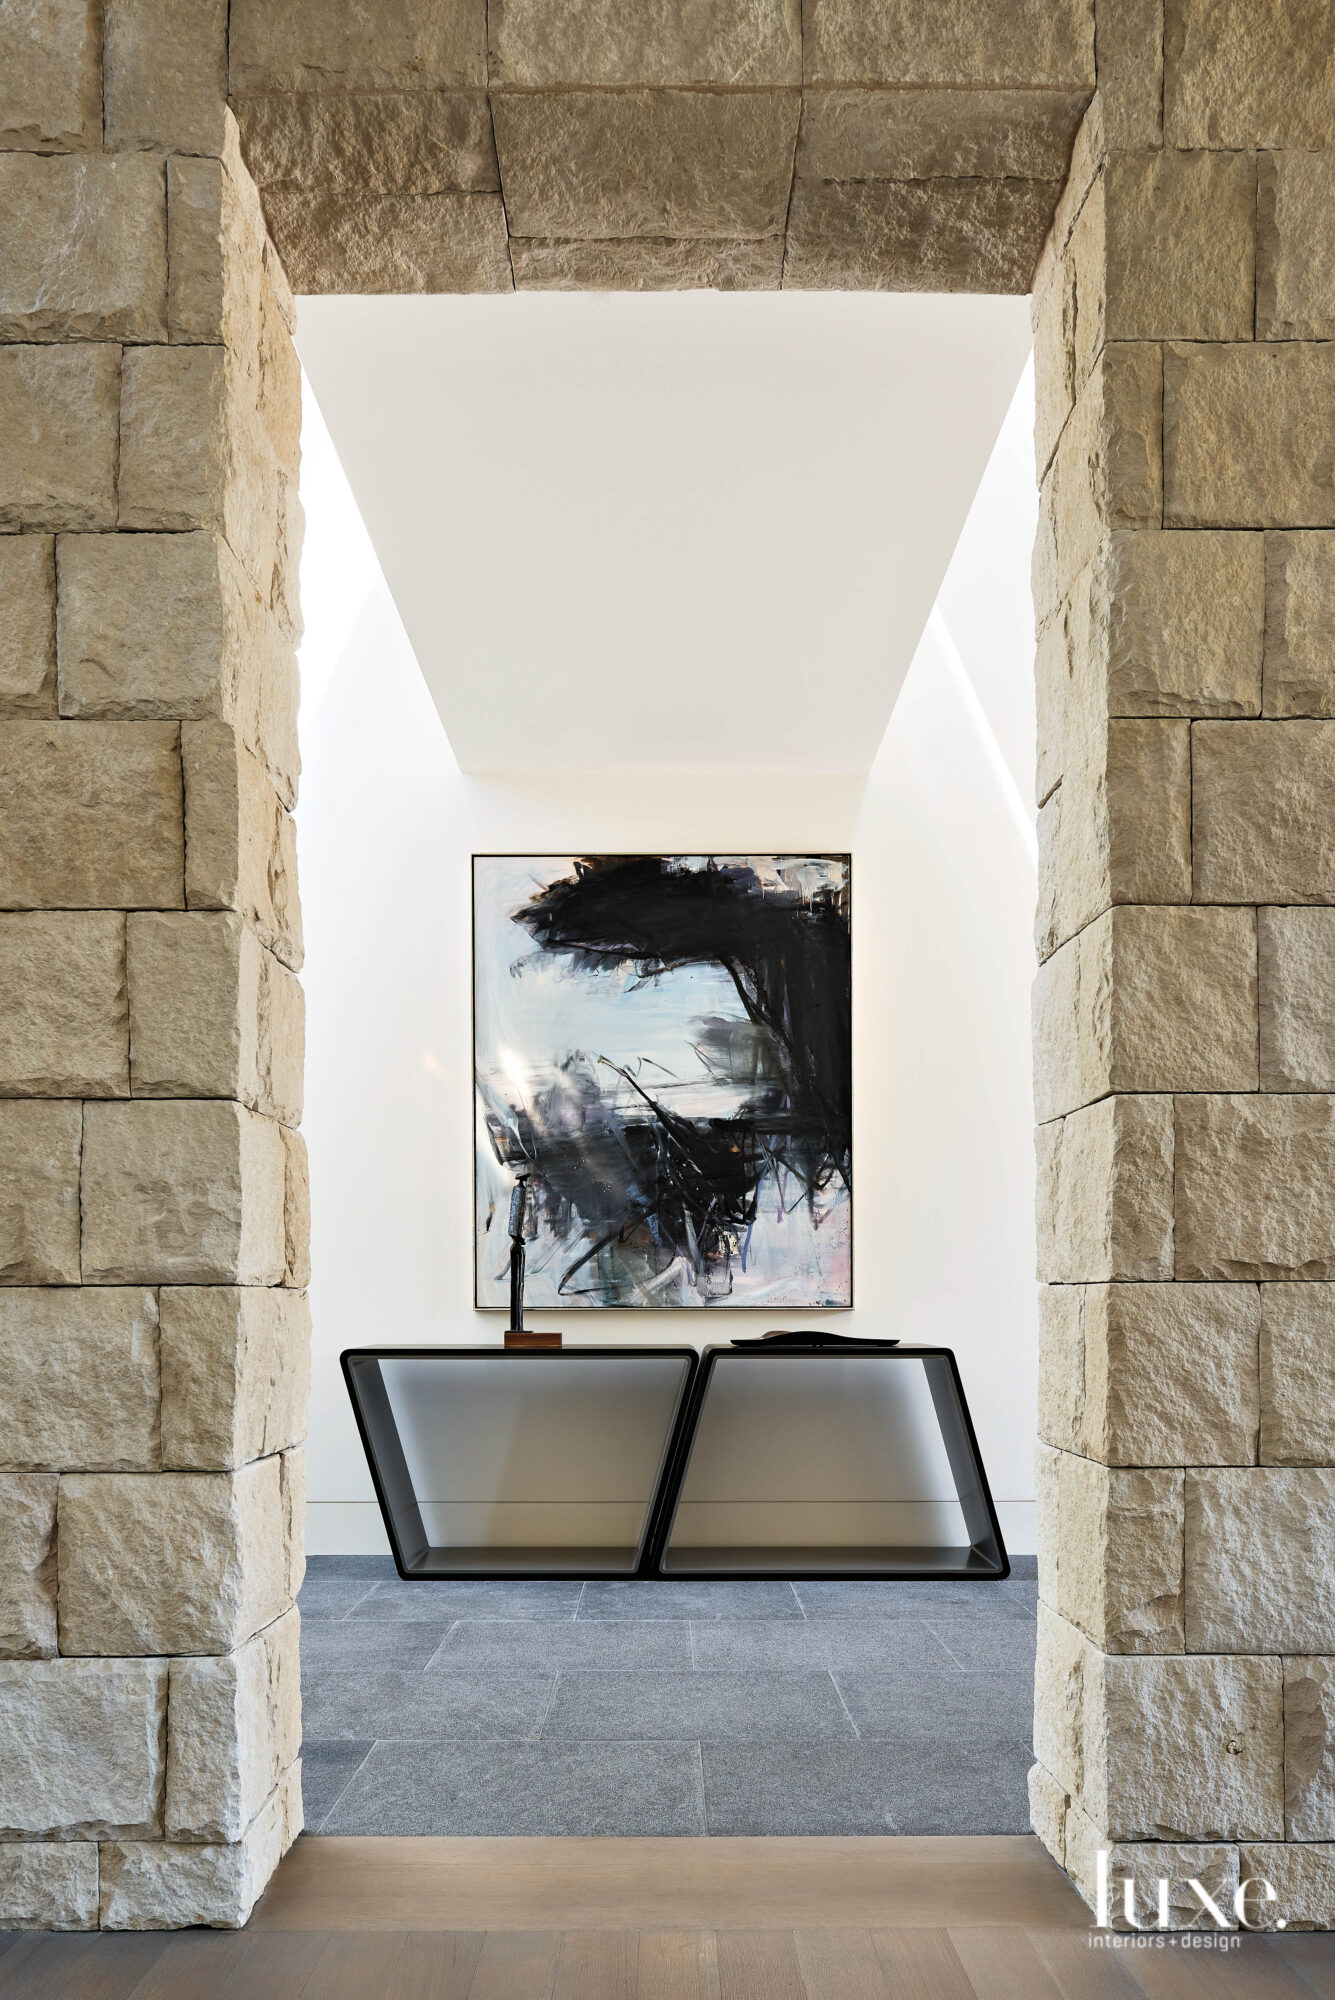 A geometric console sits beneath an abstract painting.